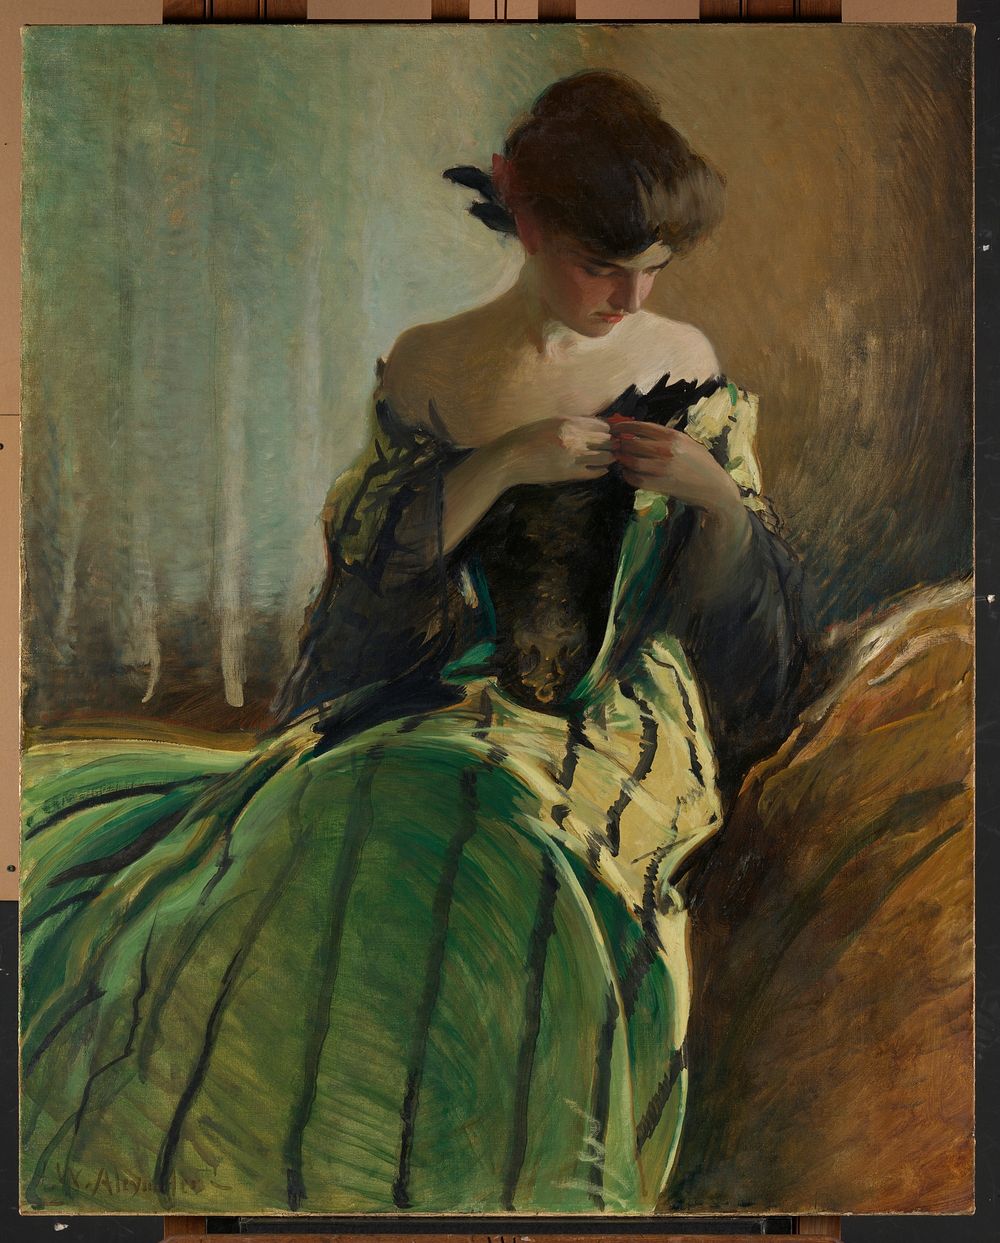 Study in Black and Green  by John White Alexander